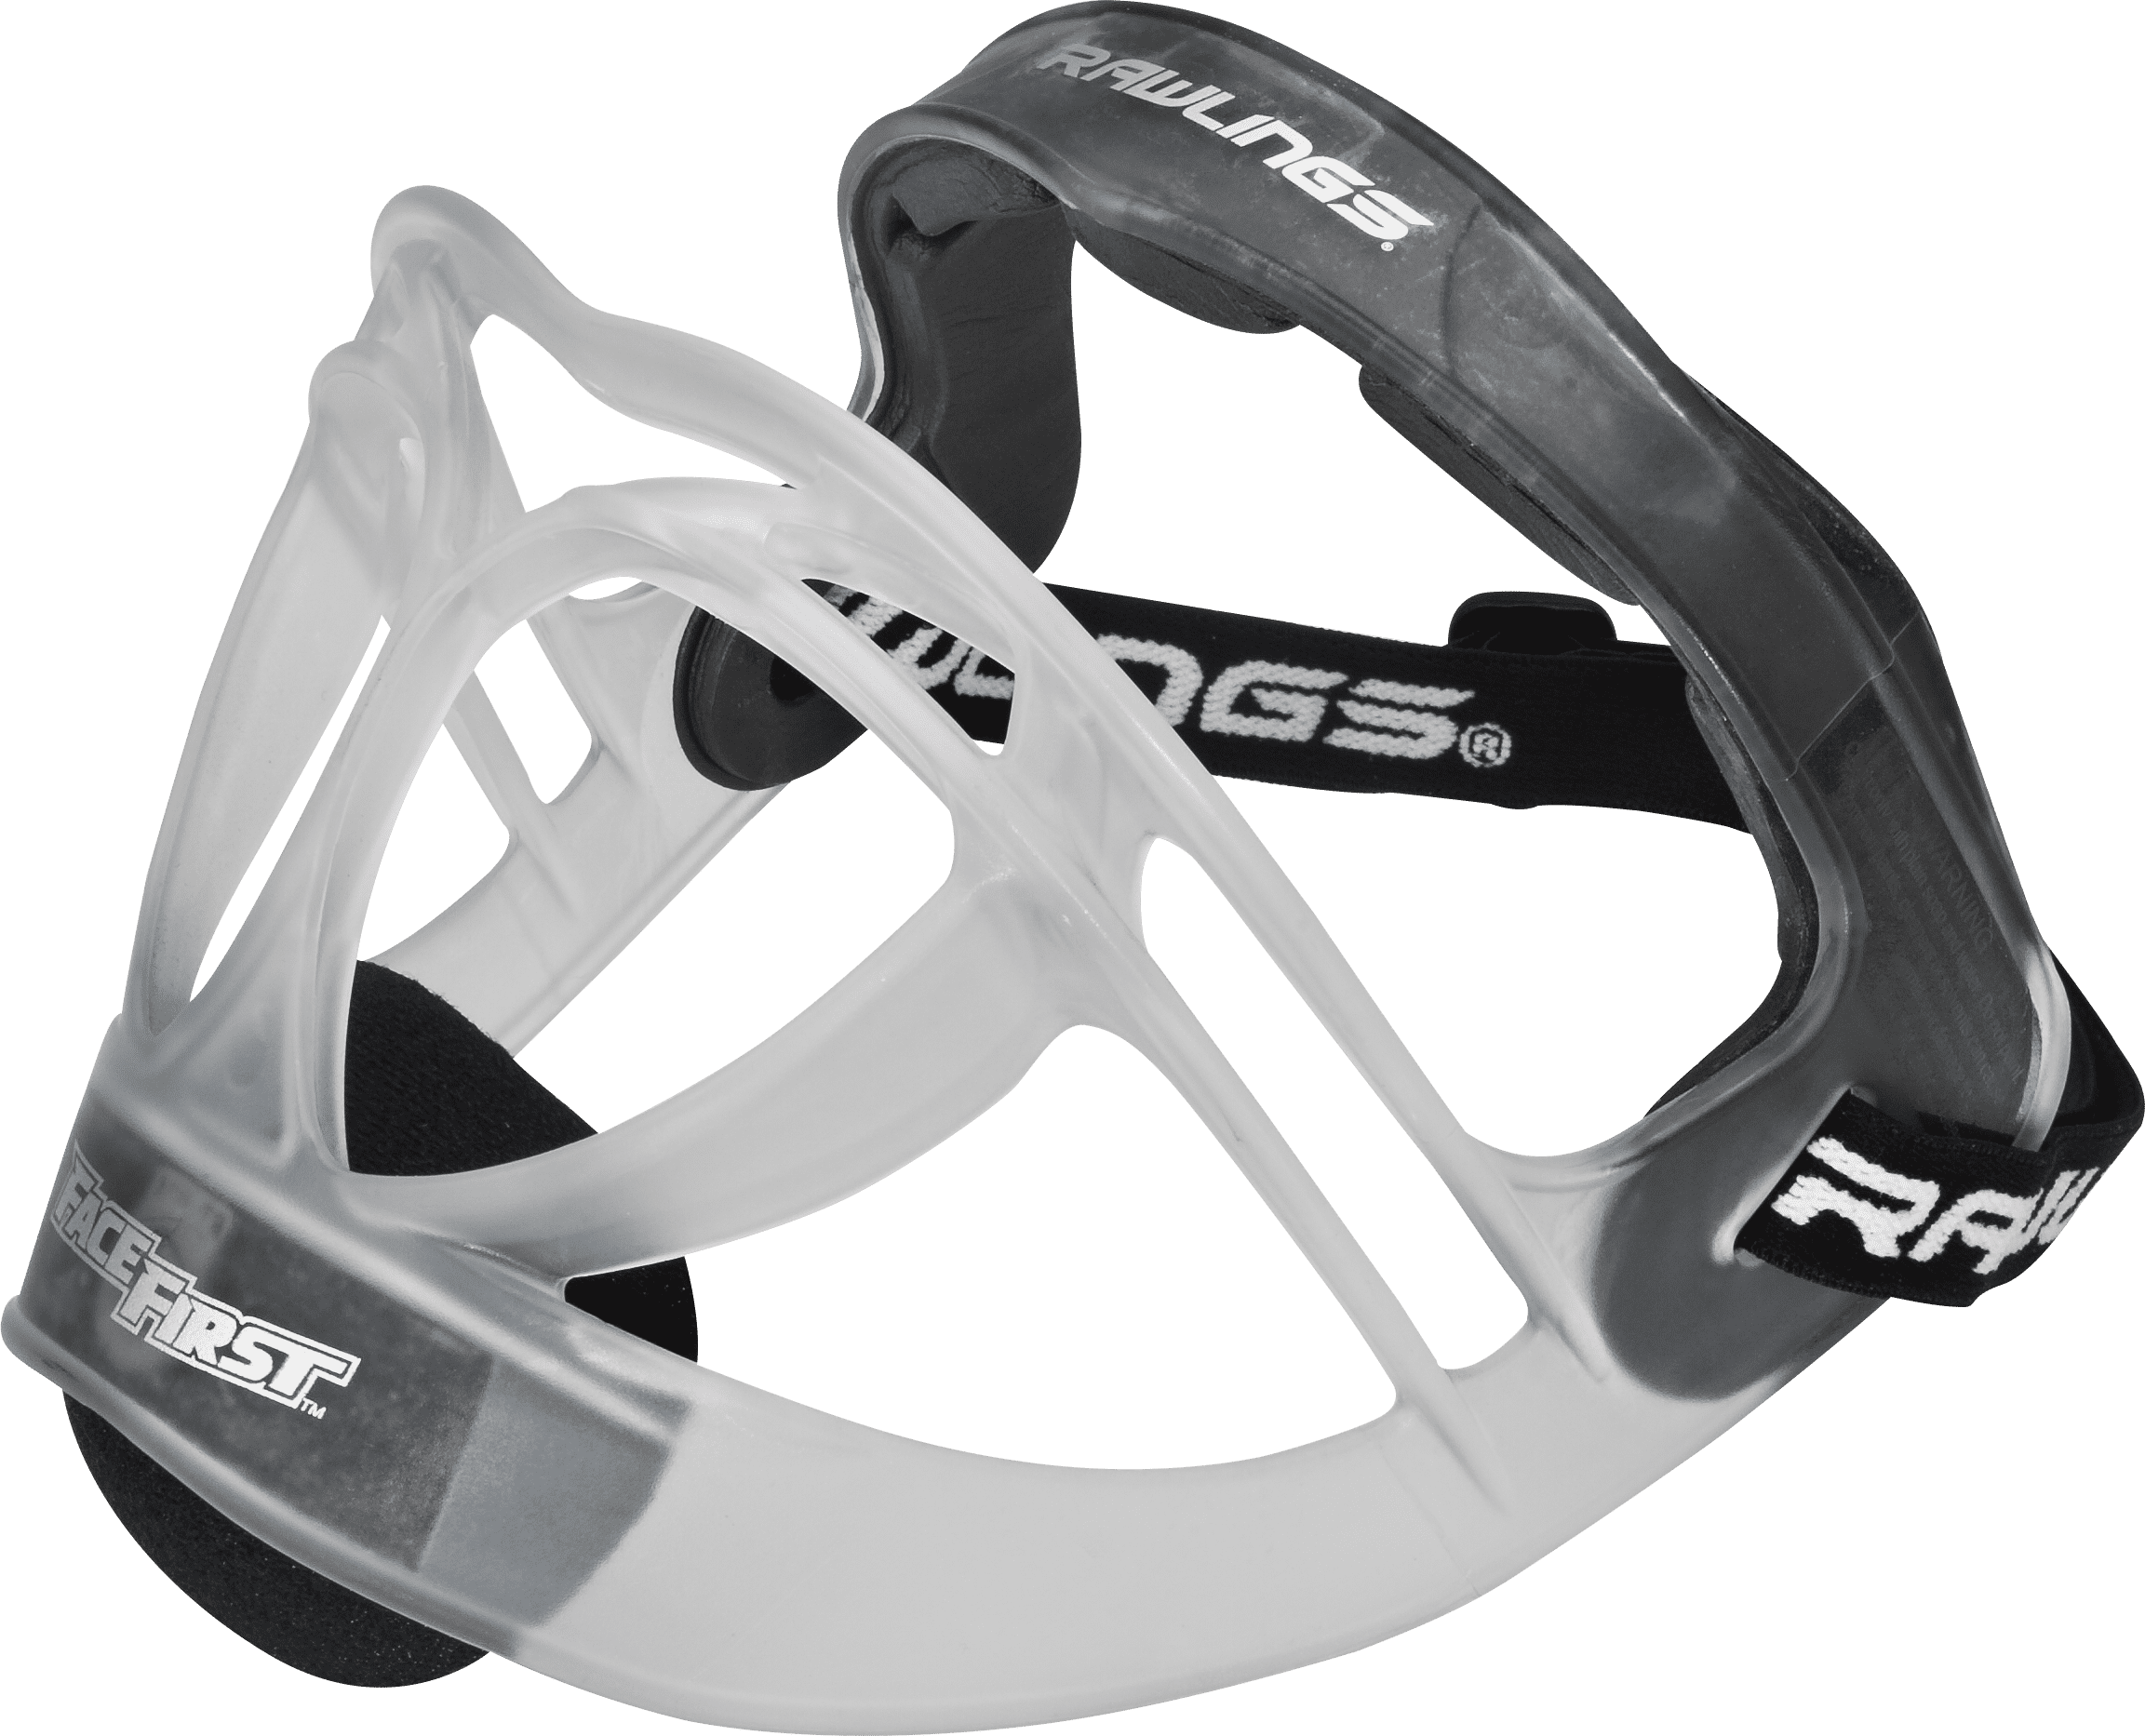 Rawlings Face First Softball Fielders Mask for sale online 